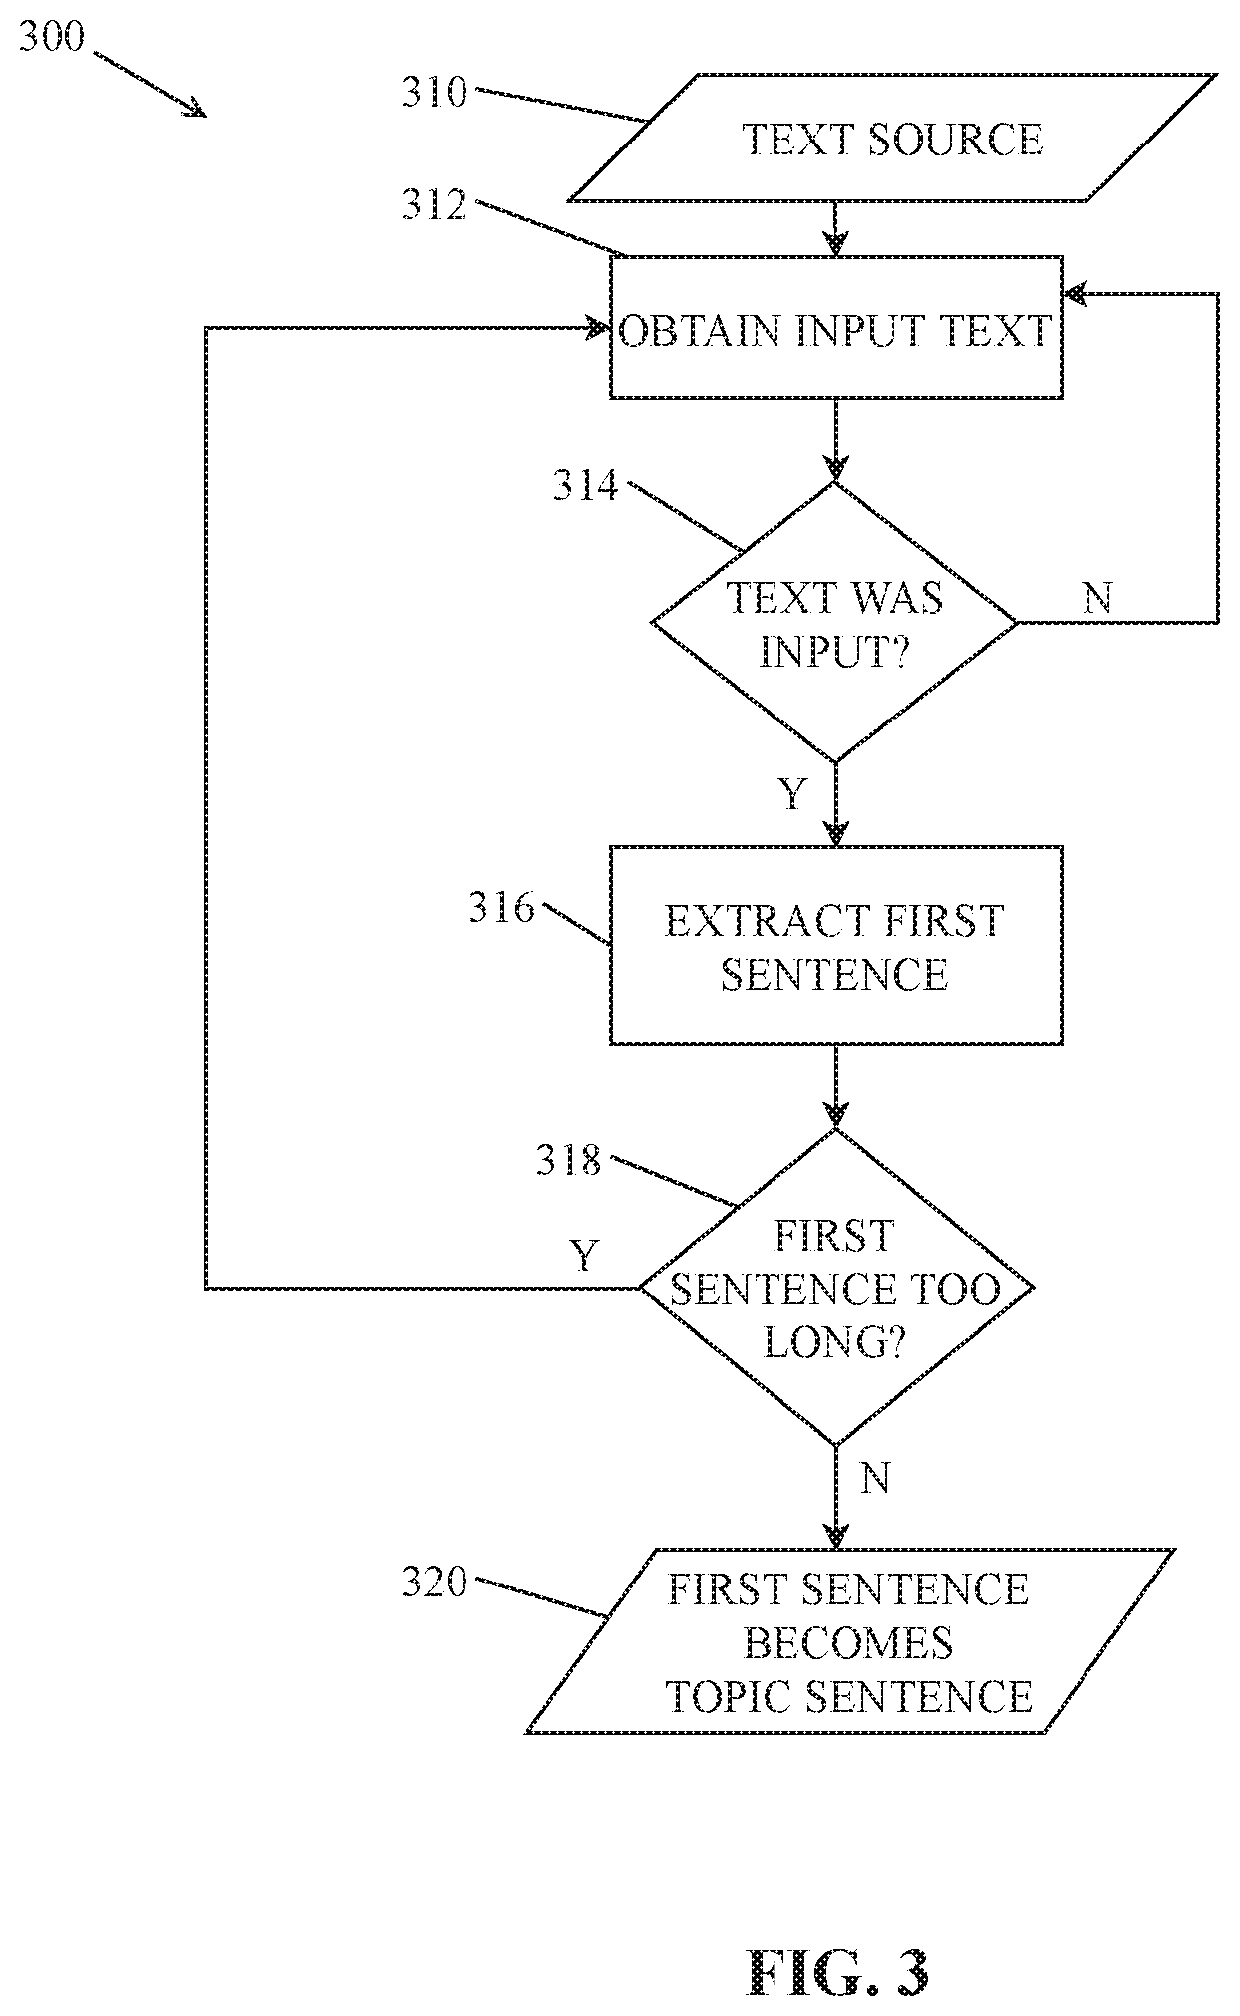 Systems and methods for generating comedy